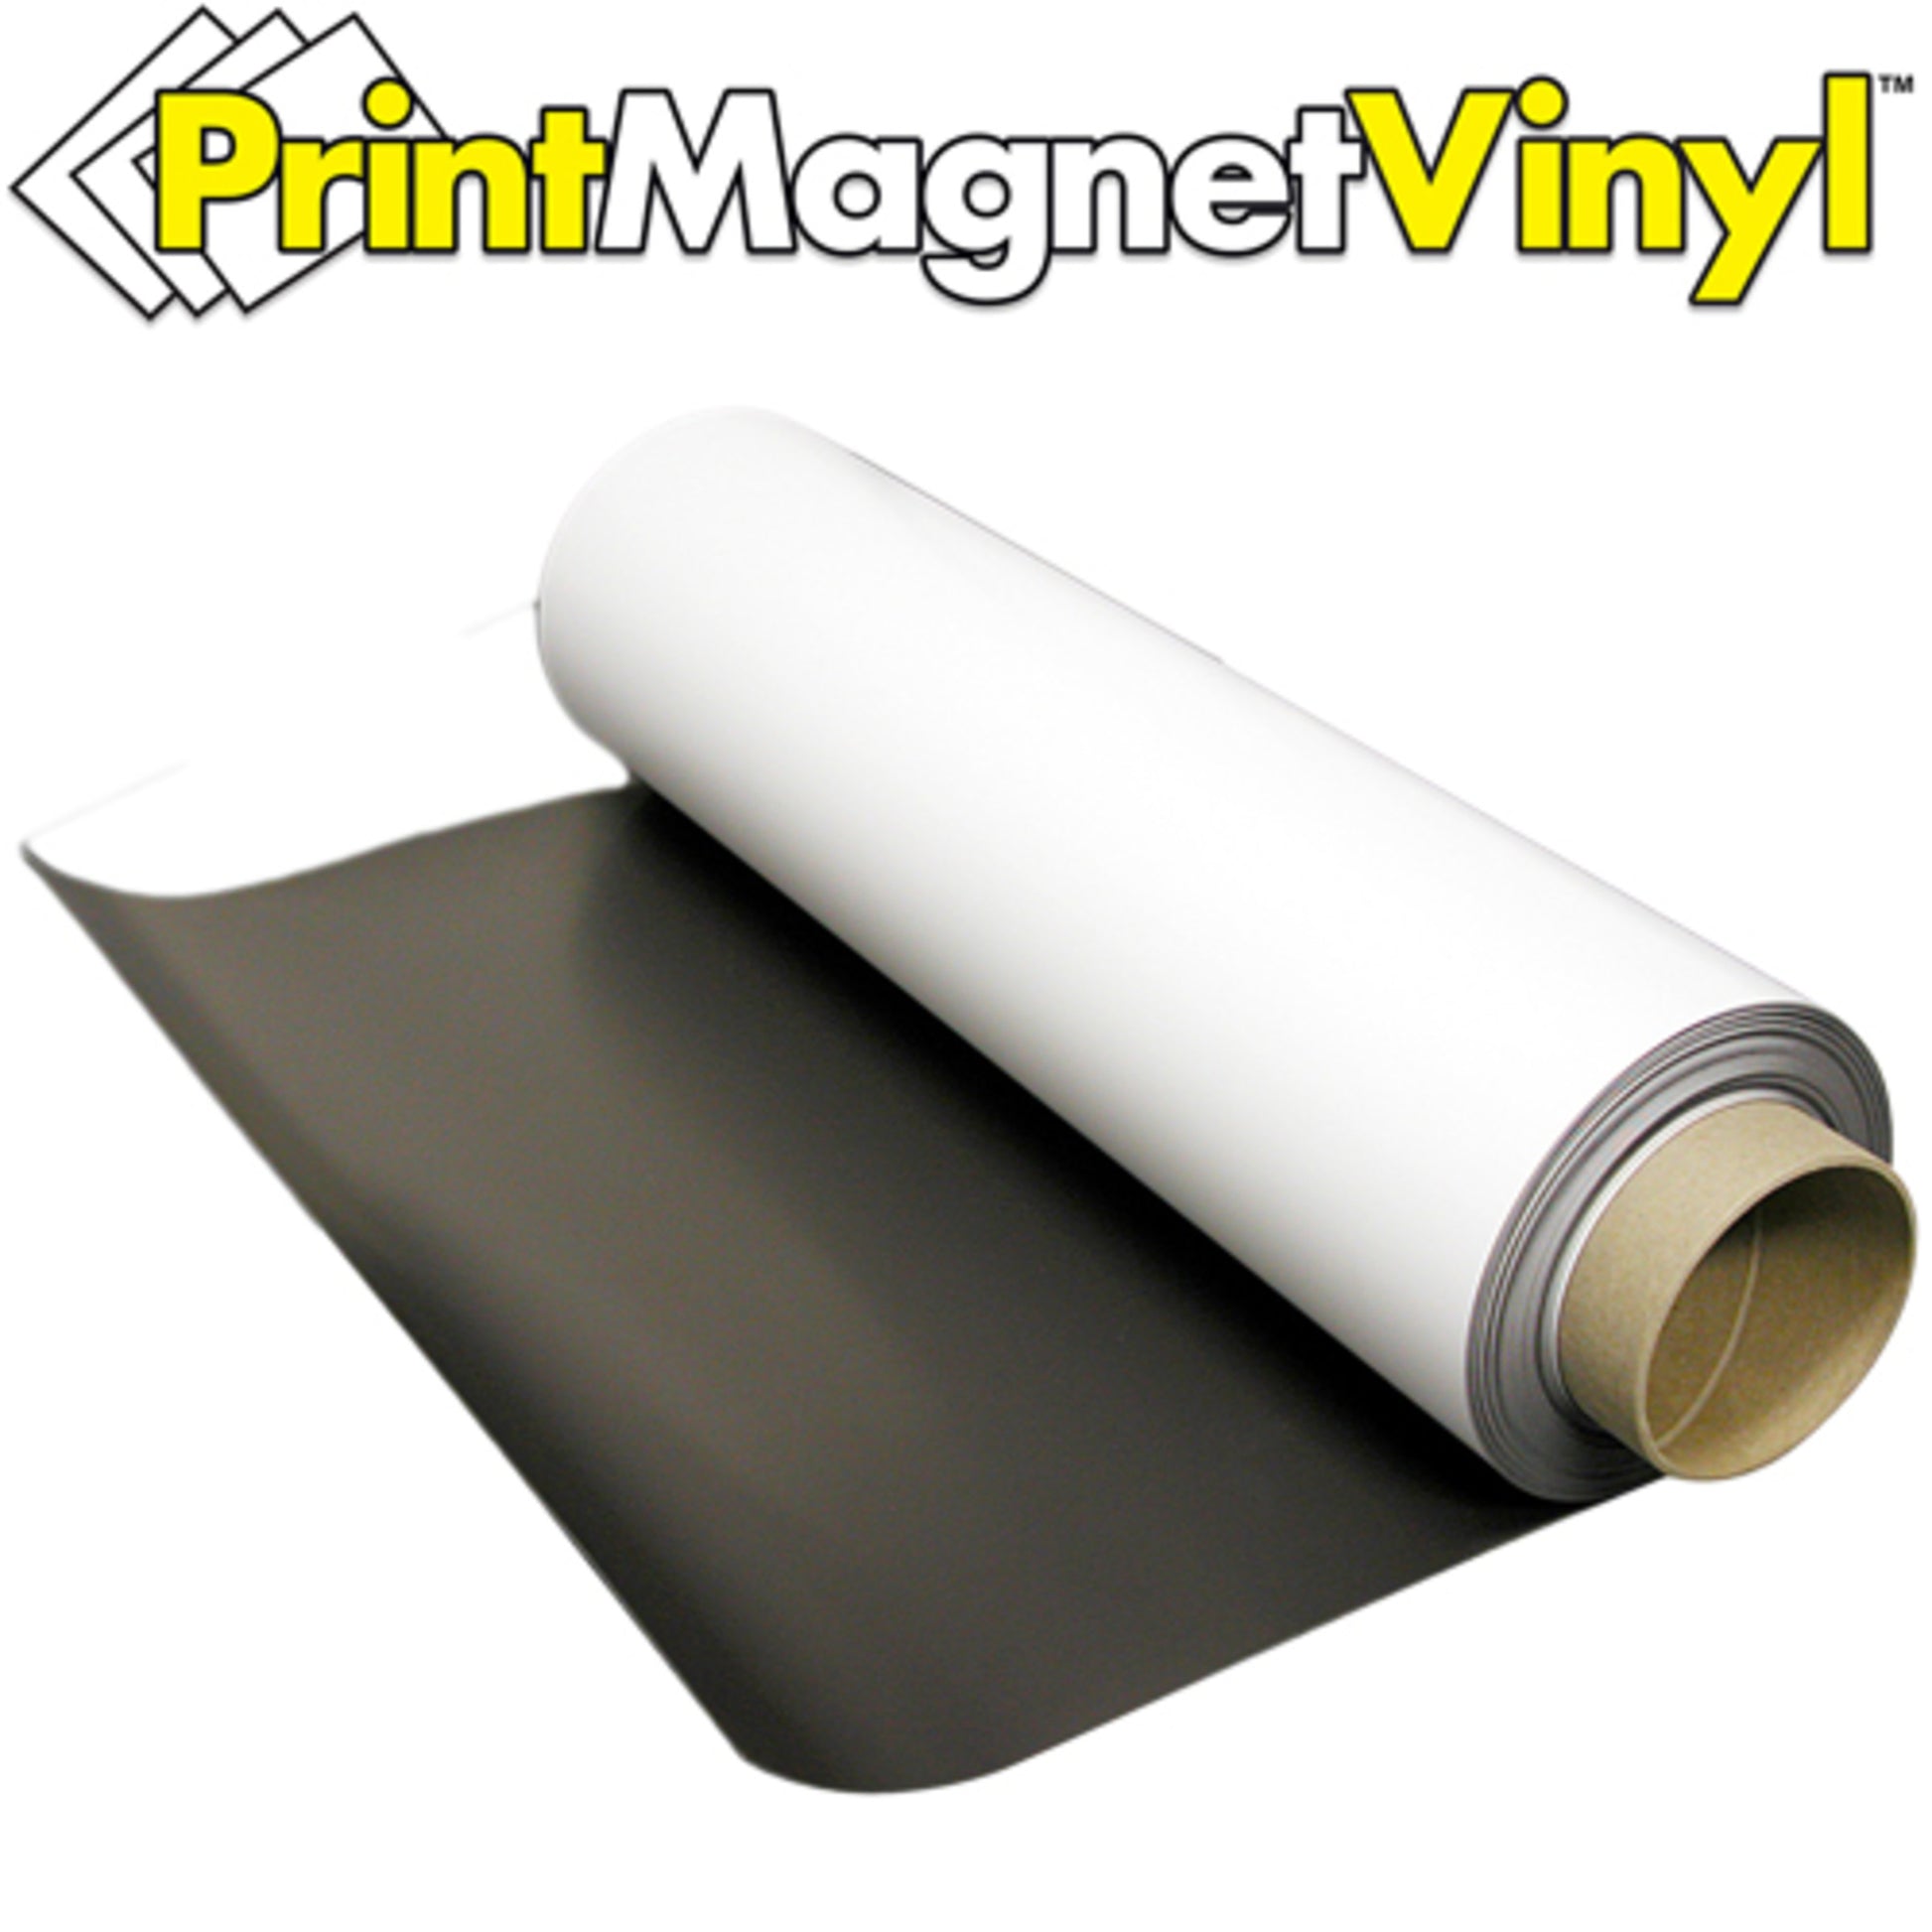 Load image into Gallery viewer, ZGN1524GW100 PrintMagnetVinyl™ Flexible Magnetic Sheet - In Use